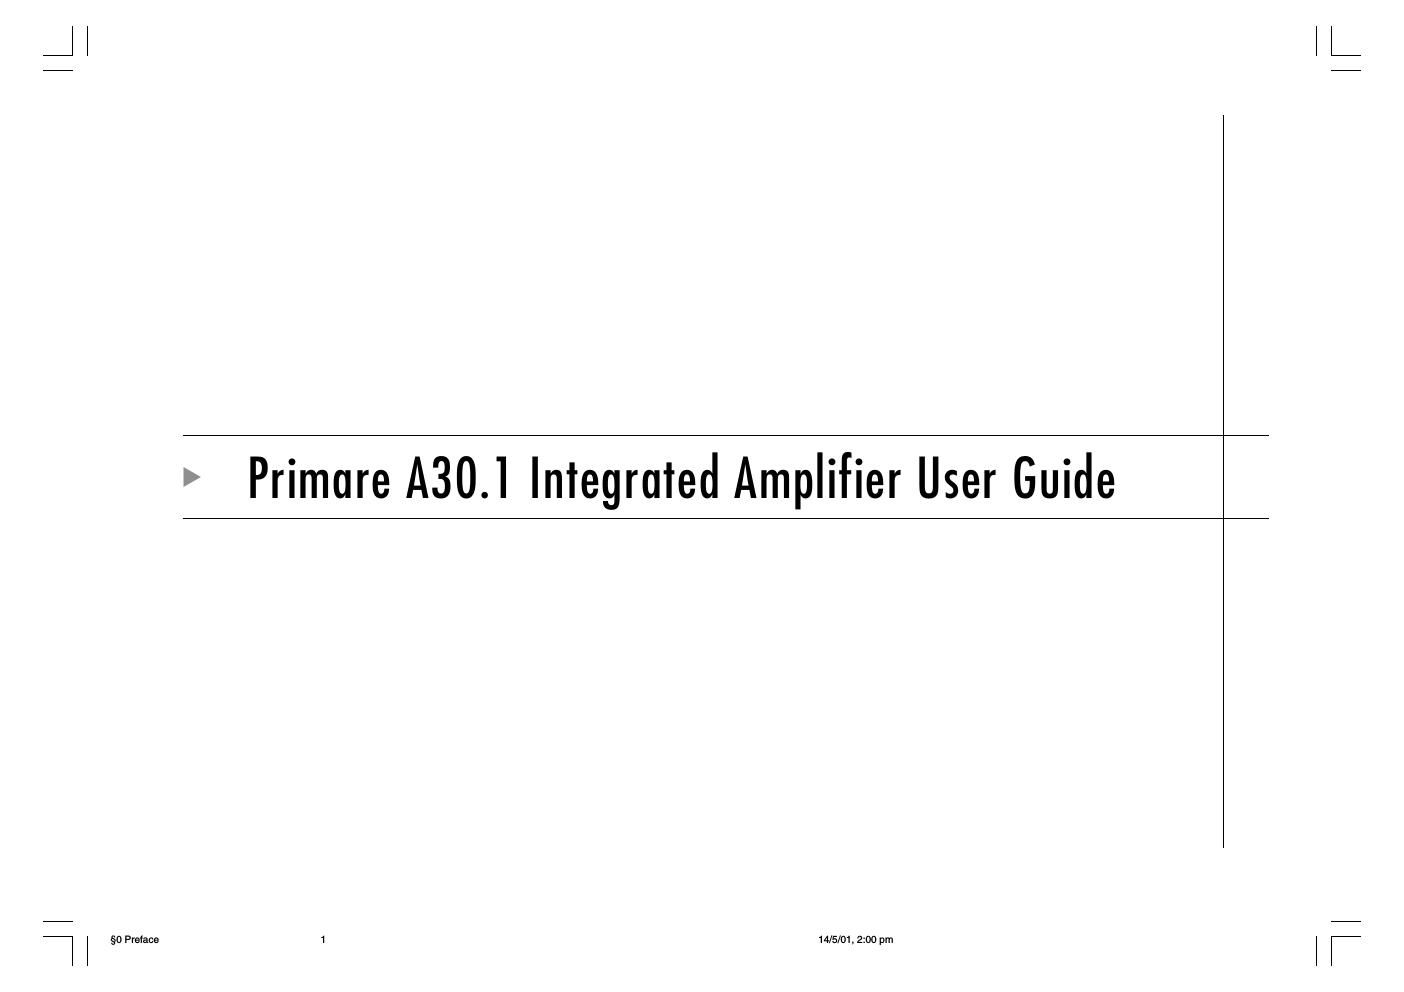 primare a 30 1 owners manual